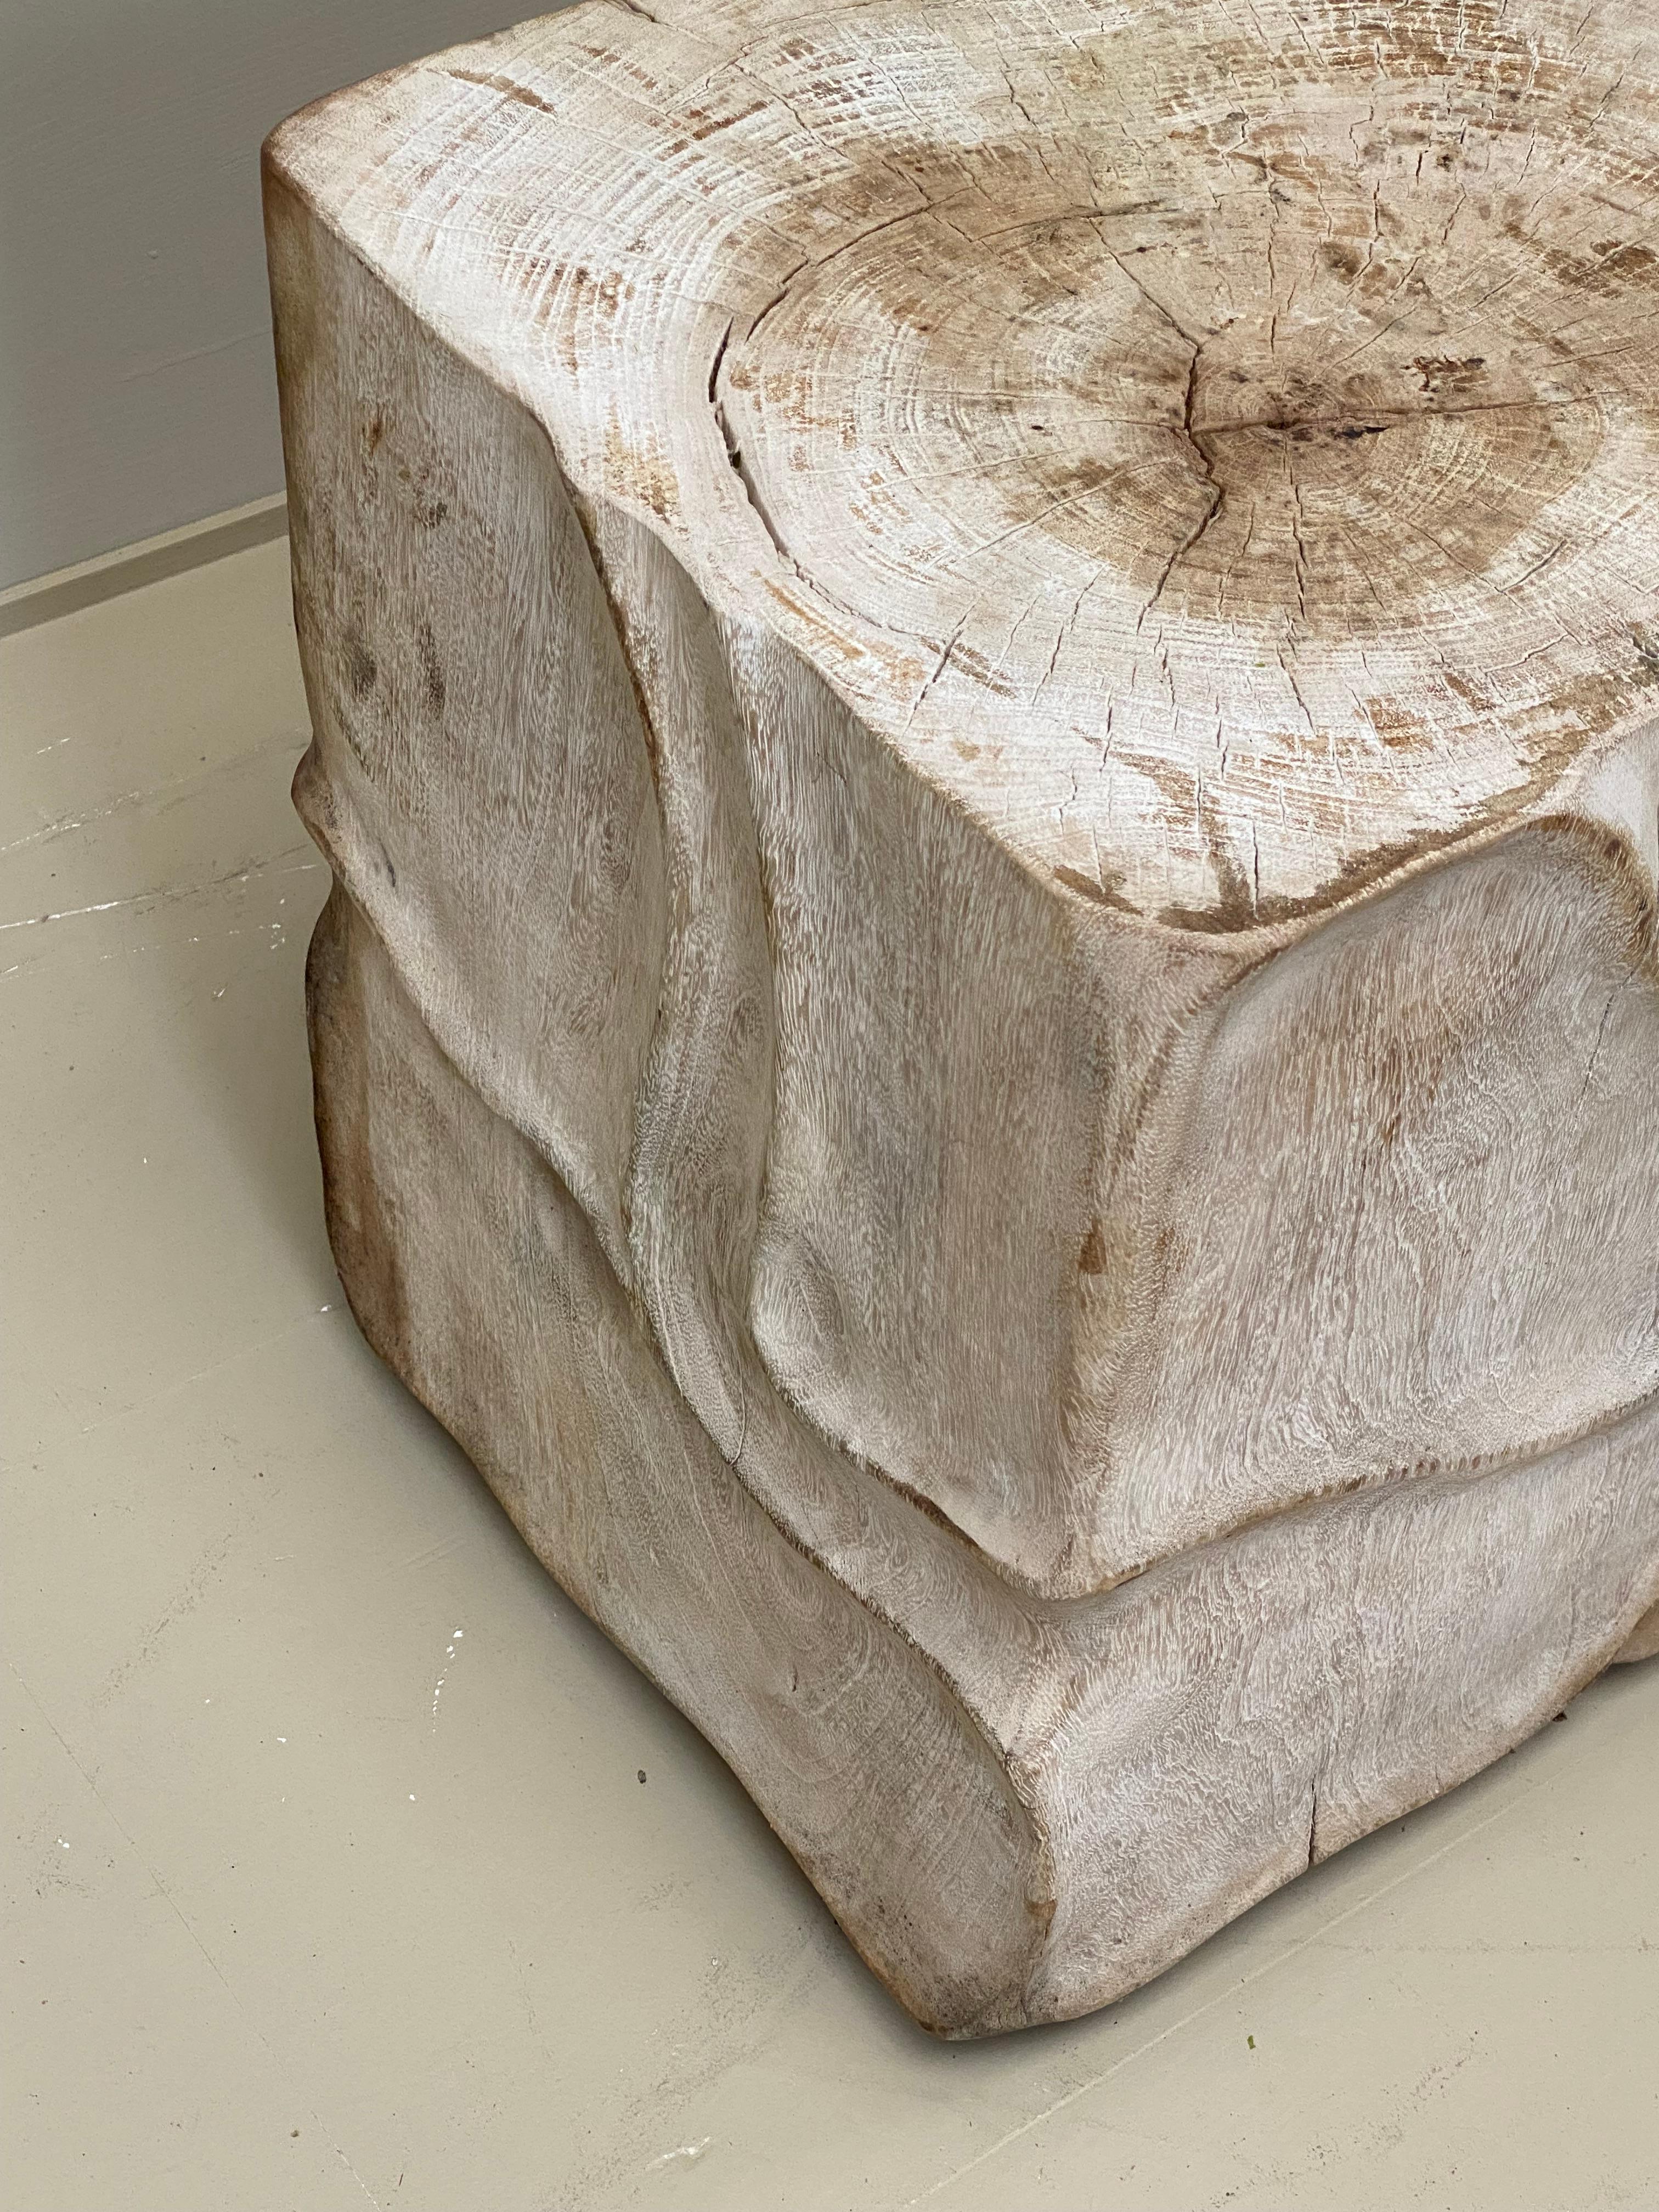 Late 20th Century Pair of Wooden, Brutalist Side Side Tables - Rustic Wooden Stools.